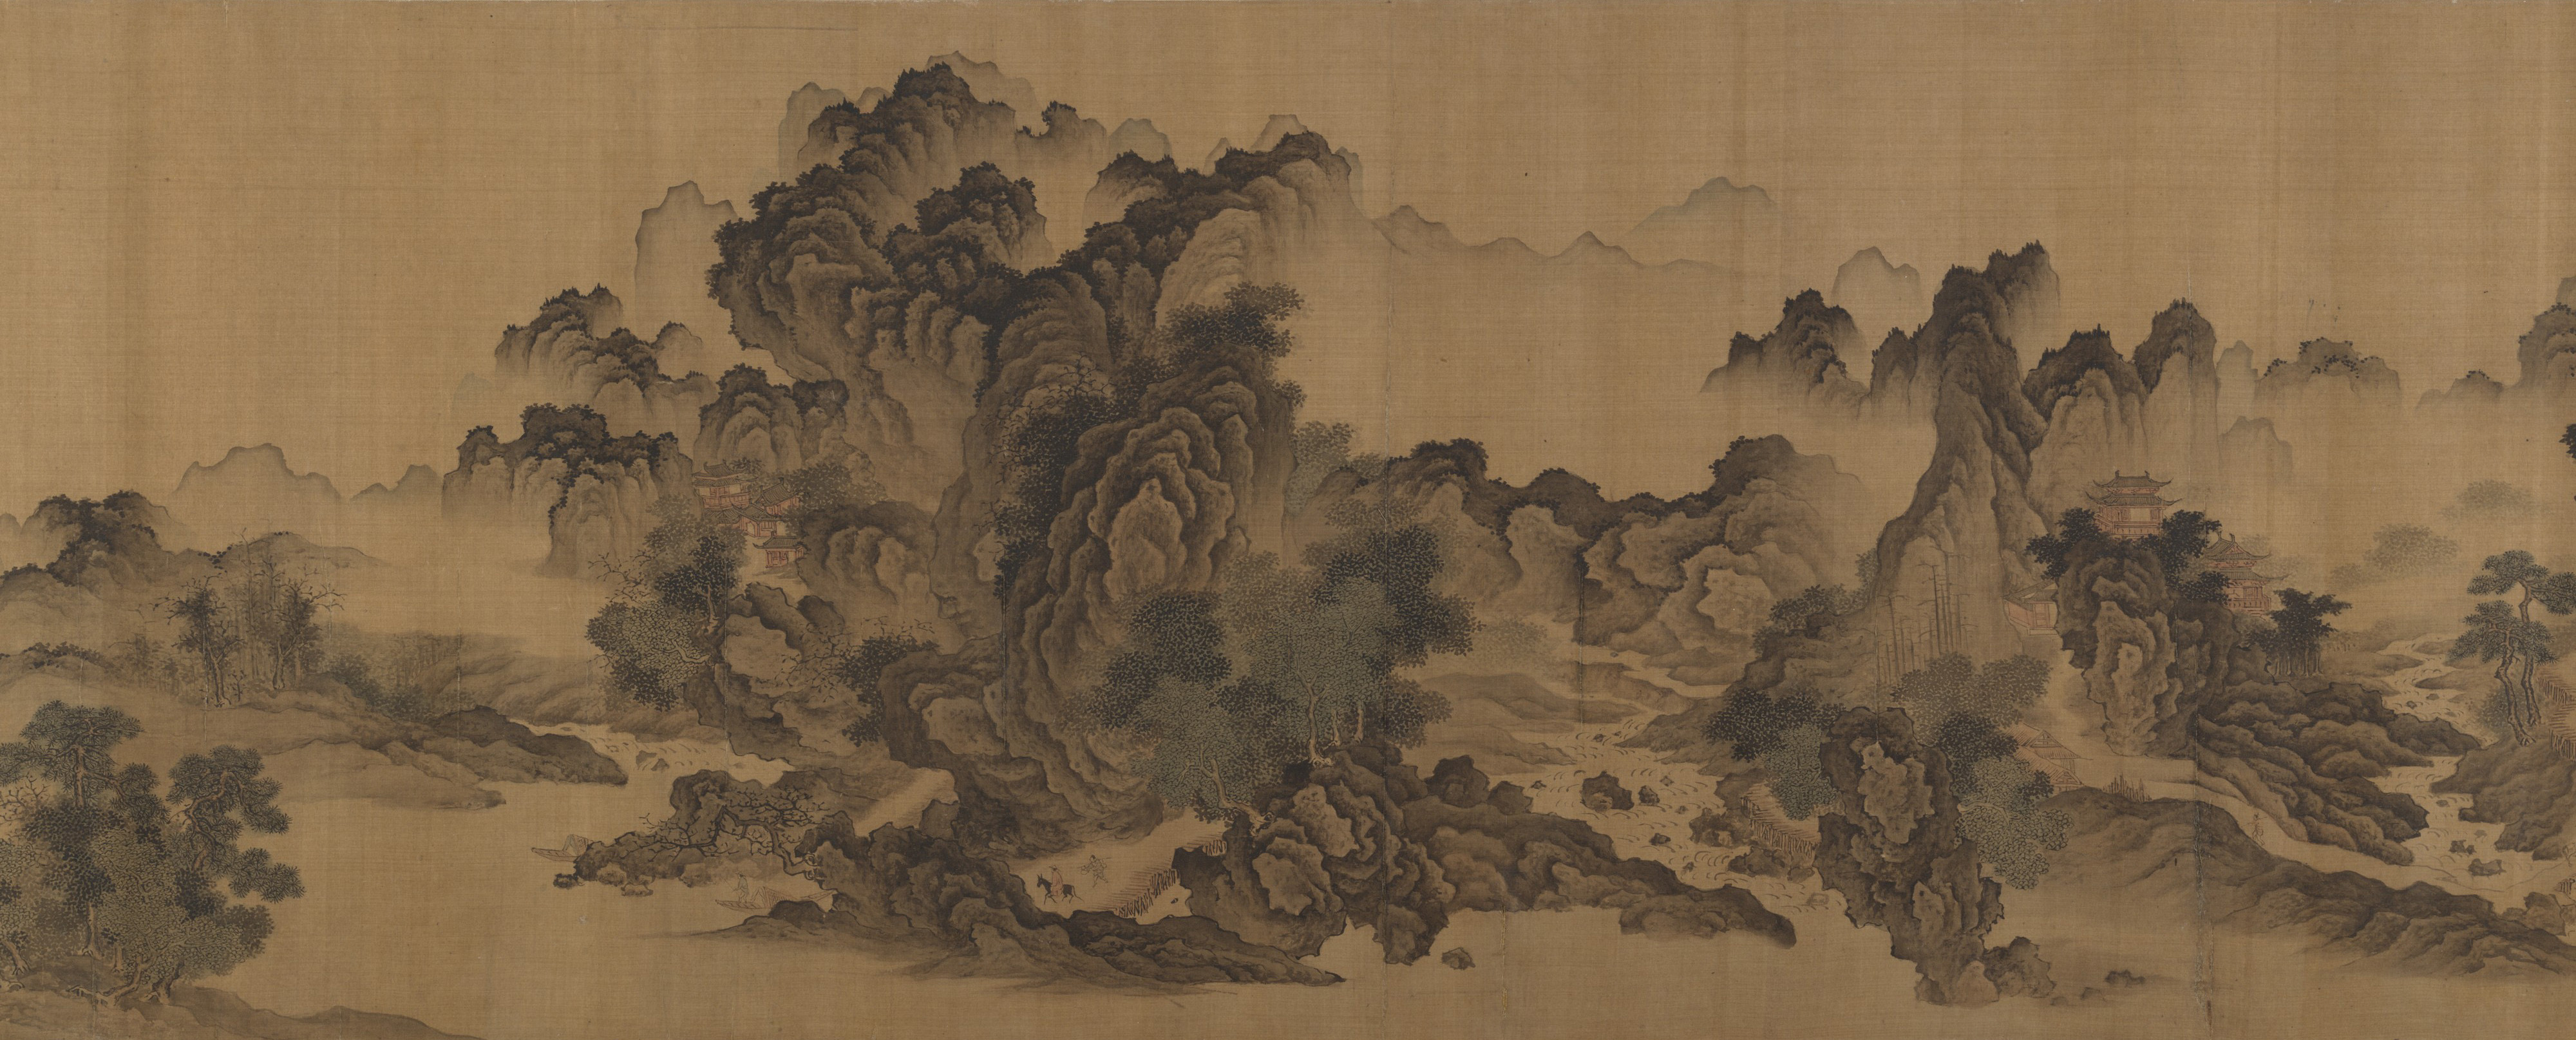 File:清 佚名 倣郭熙 溪山無盡圖 卷-Streams and Mountains Without 